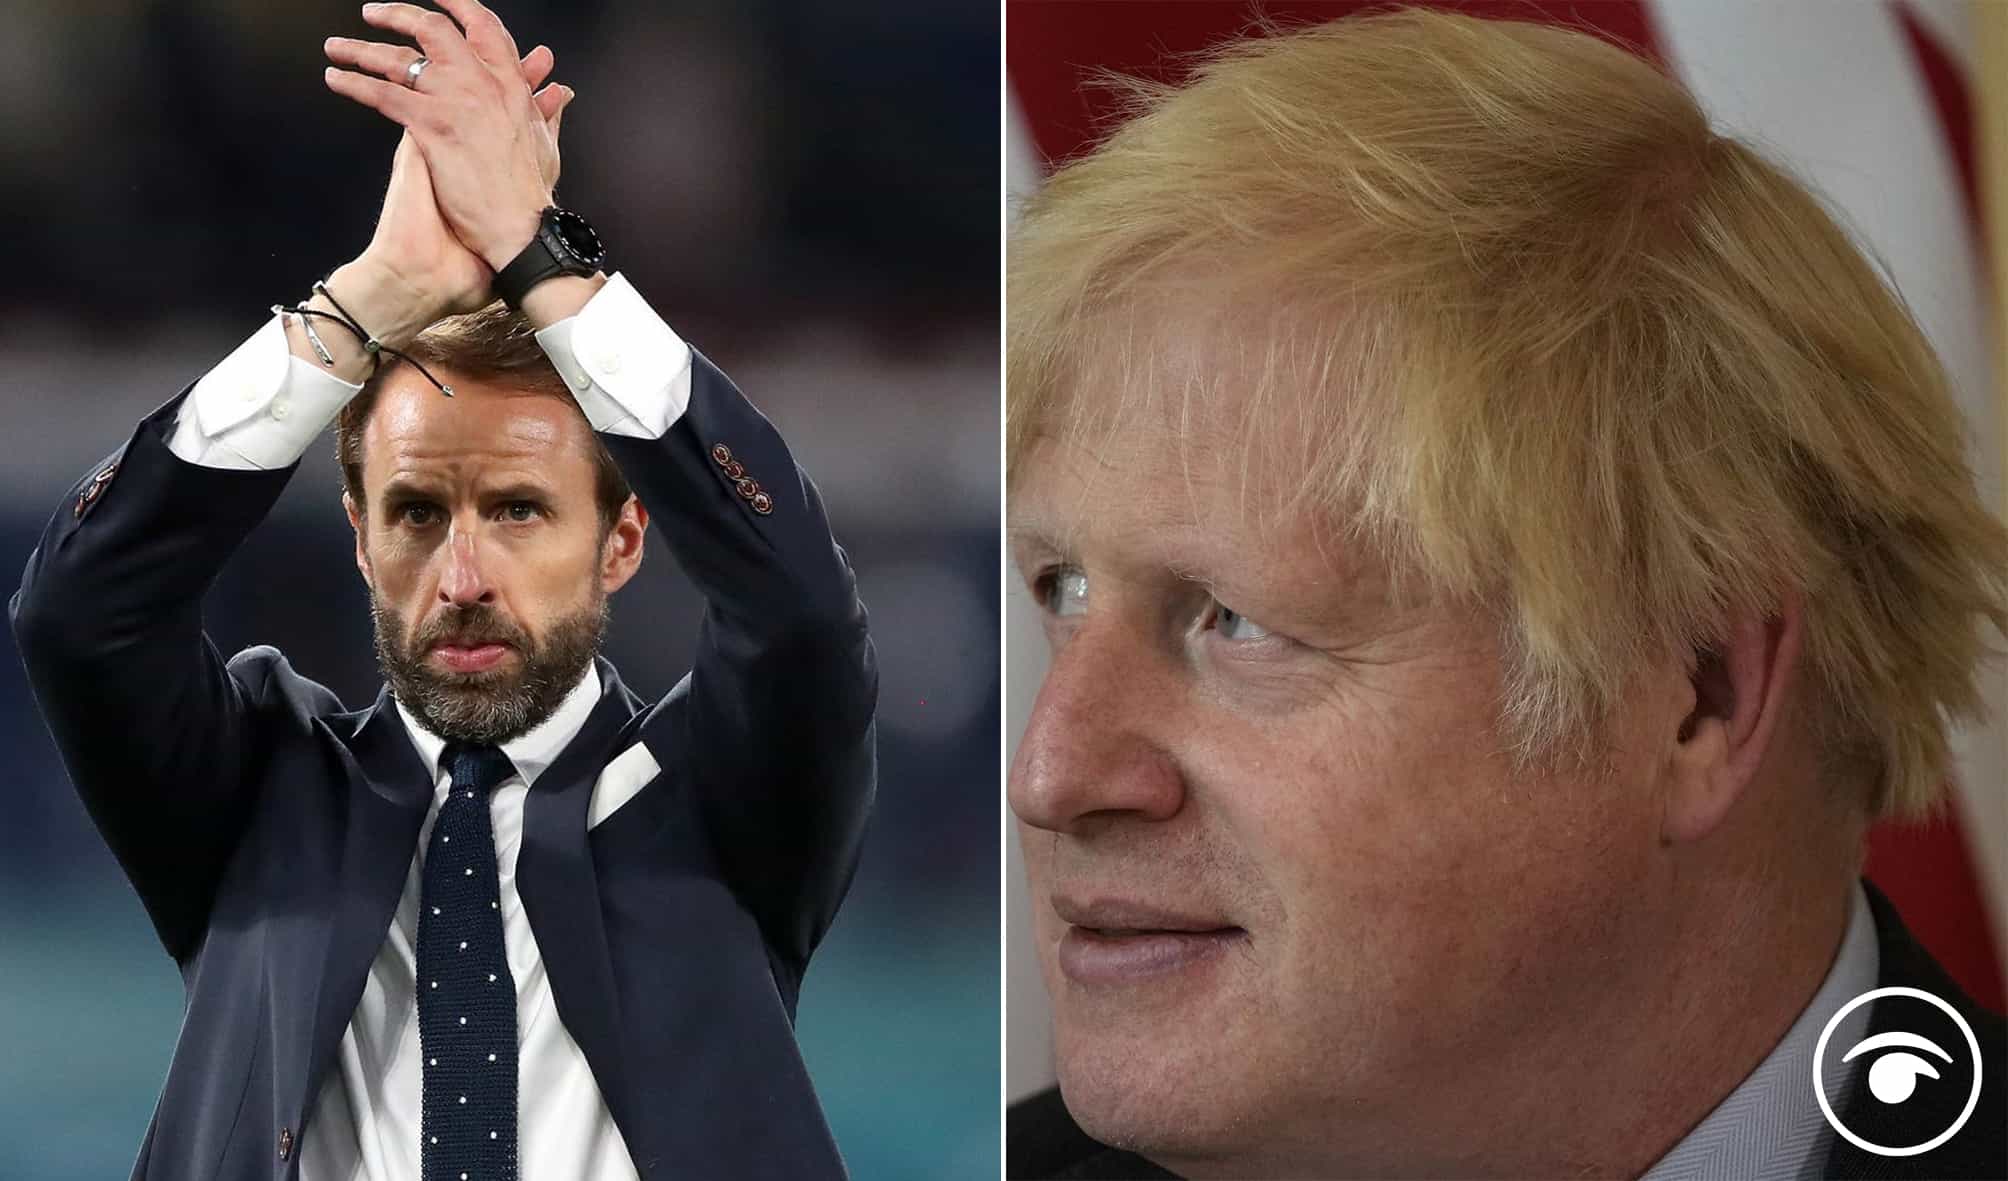 Johnson told to spend some time ‘studying at the Southgate school of leadership’